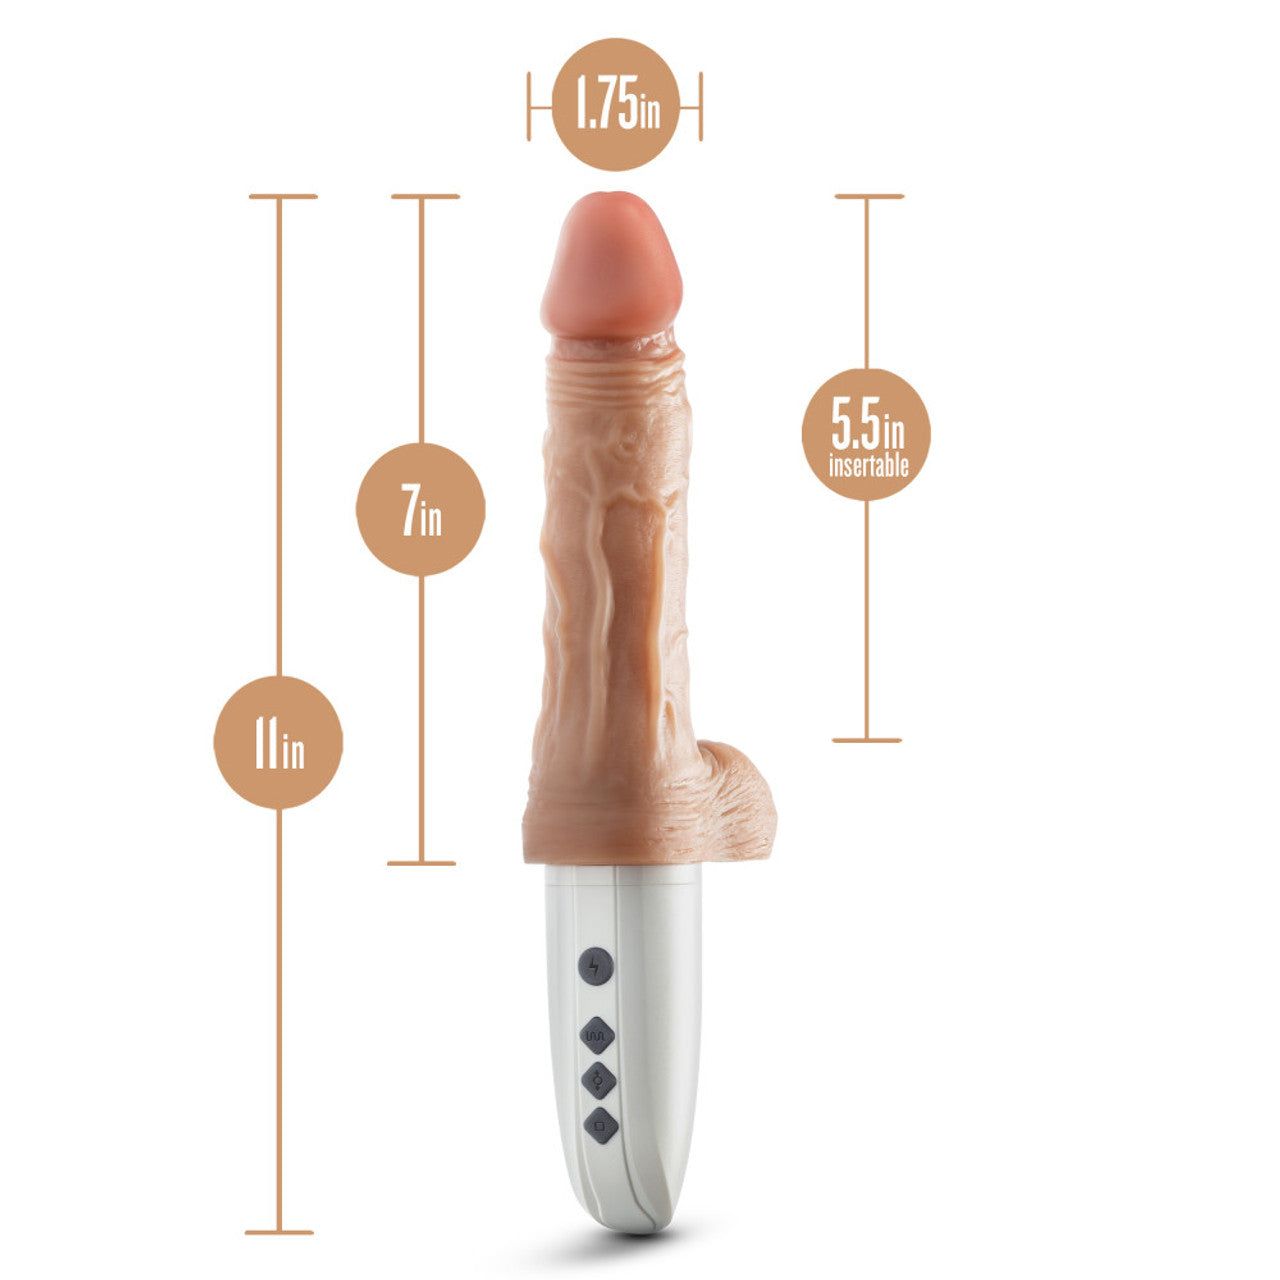 Dr. Hammer 7" Silicone Thrusting Dildo with Handle - Beige